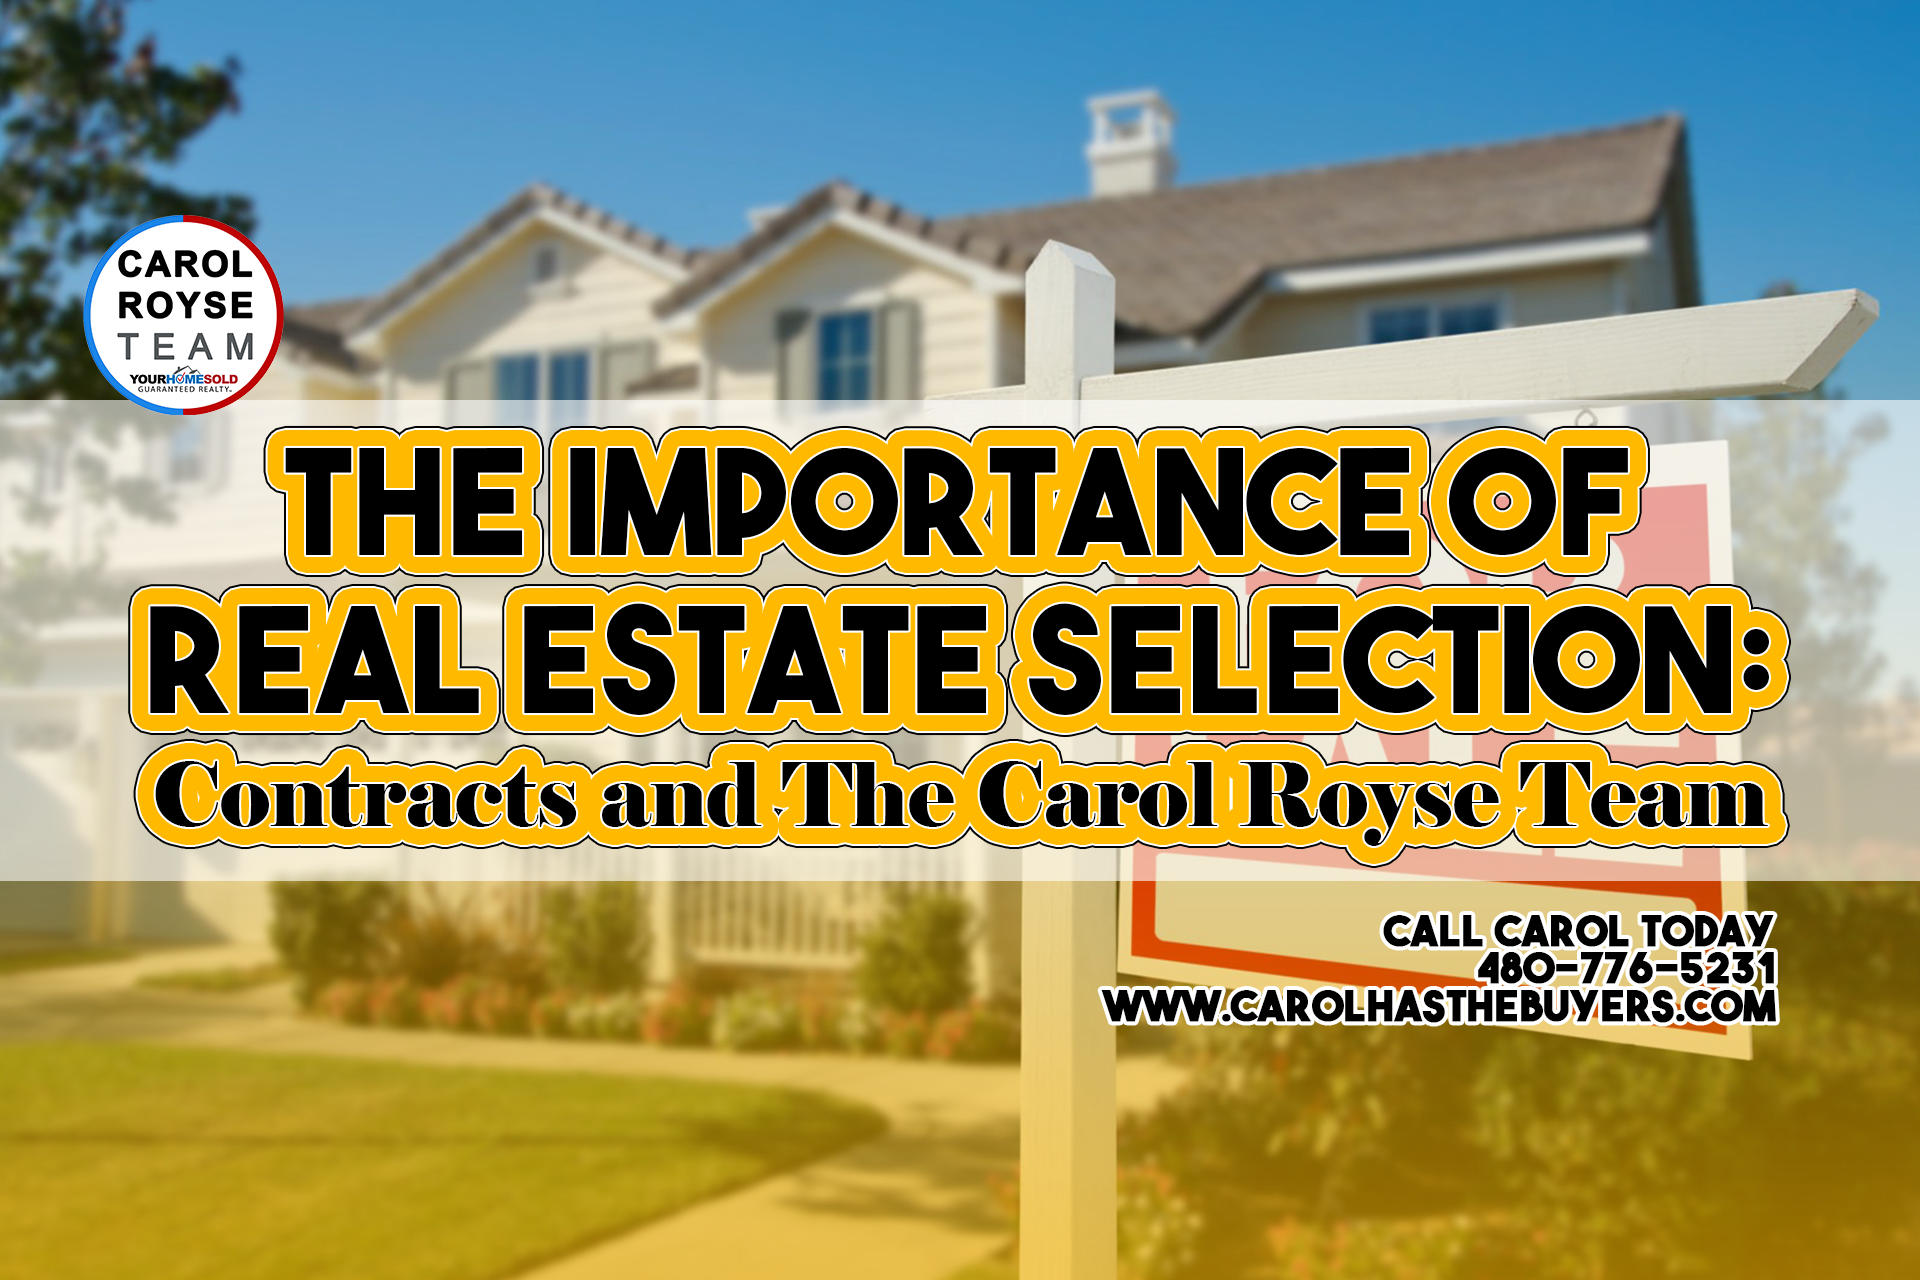 The Importance of Real Estate Selection: Contracts and The Carol Royse Team